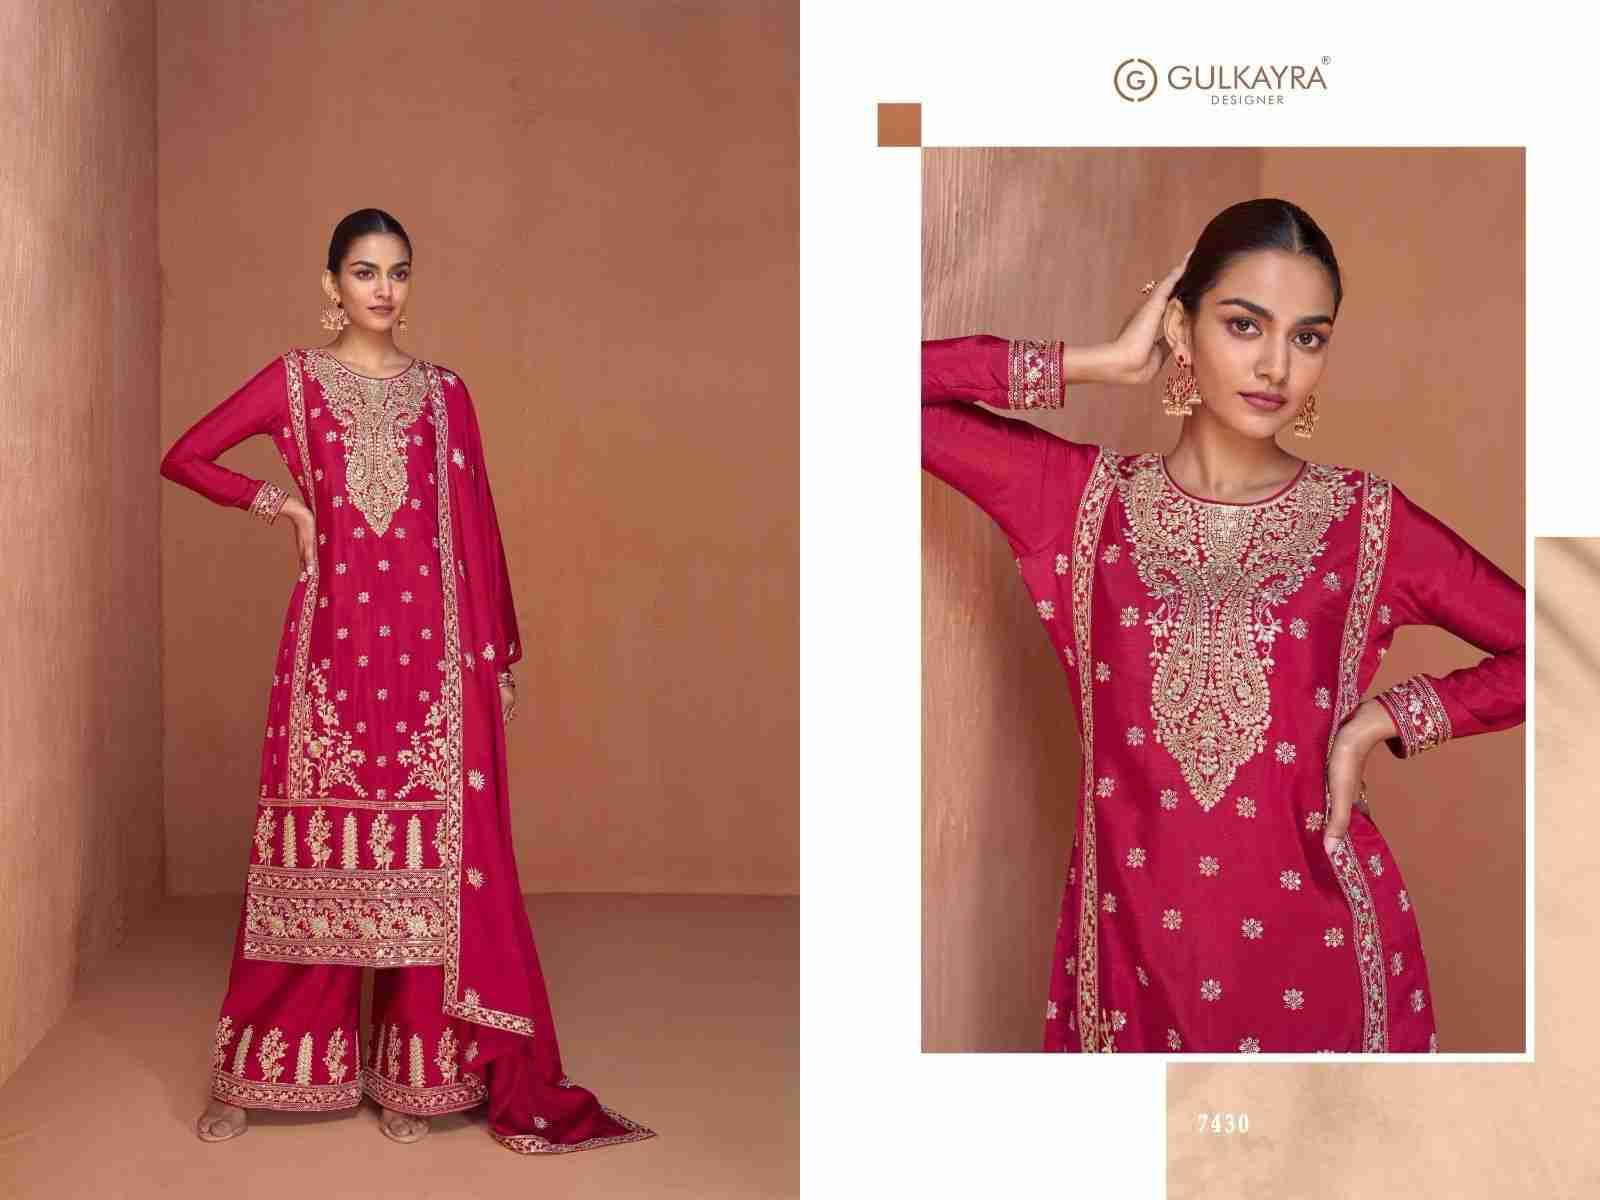 Gazal By Gulkayra Designer 7430 To 7433 Series Beautiful Sharara Suits Colorful Stylish Fancy Casual Wear & Ethnic Wear Chinnon Dresses At Wholesale Price